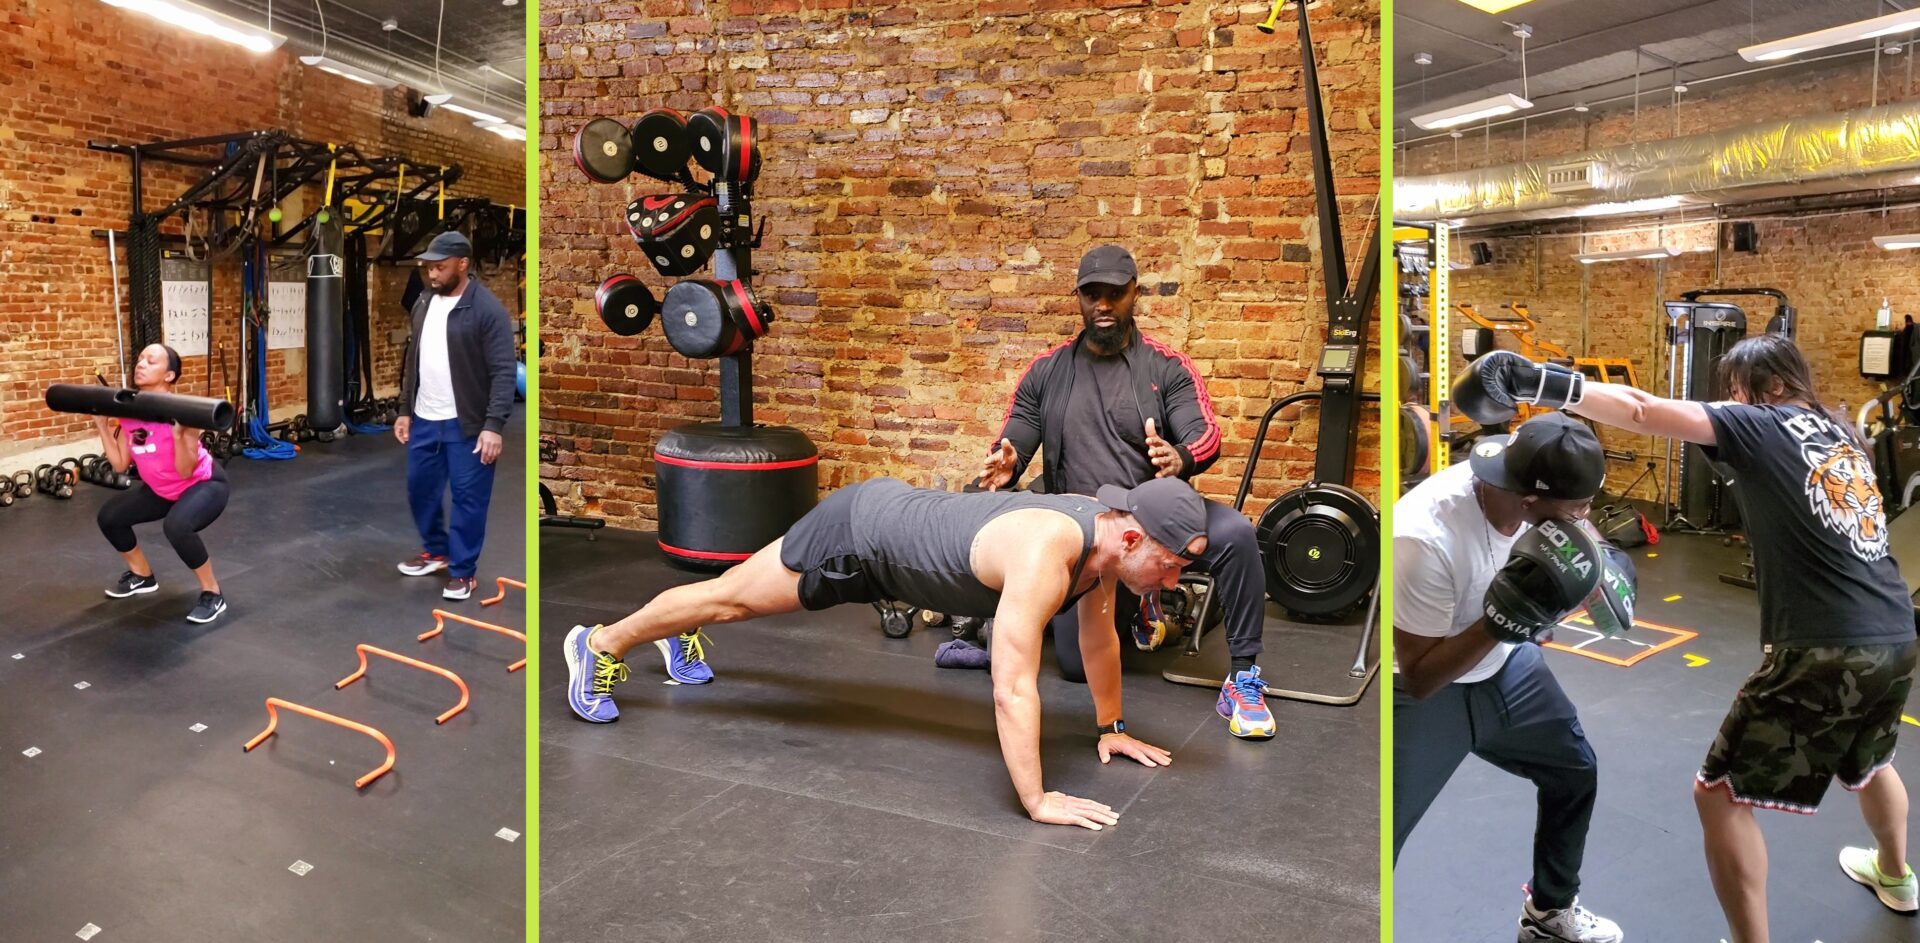 A man doing push ups in front of two other men.